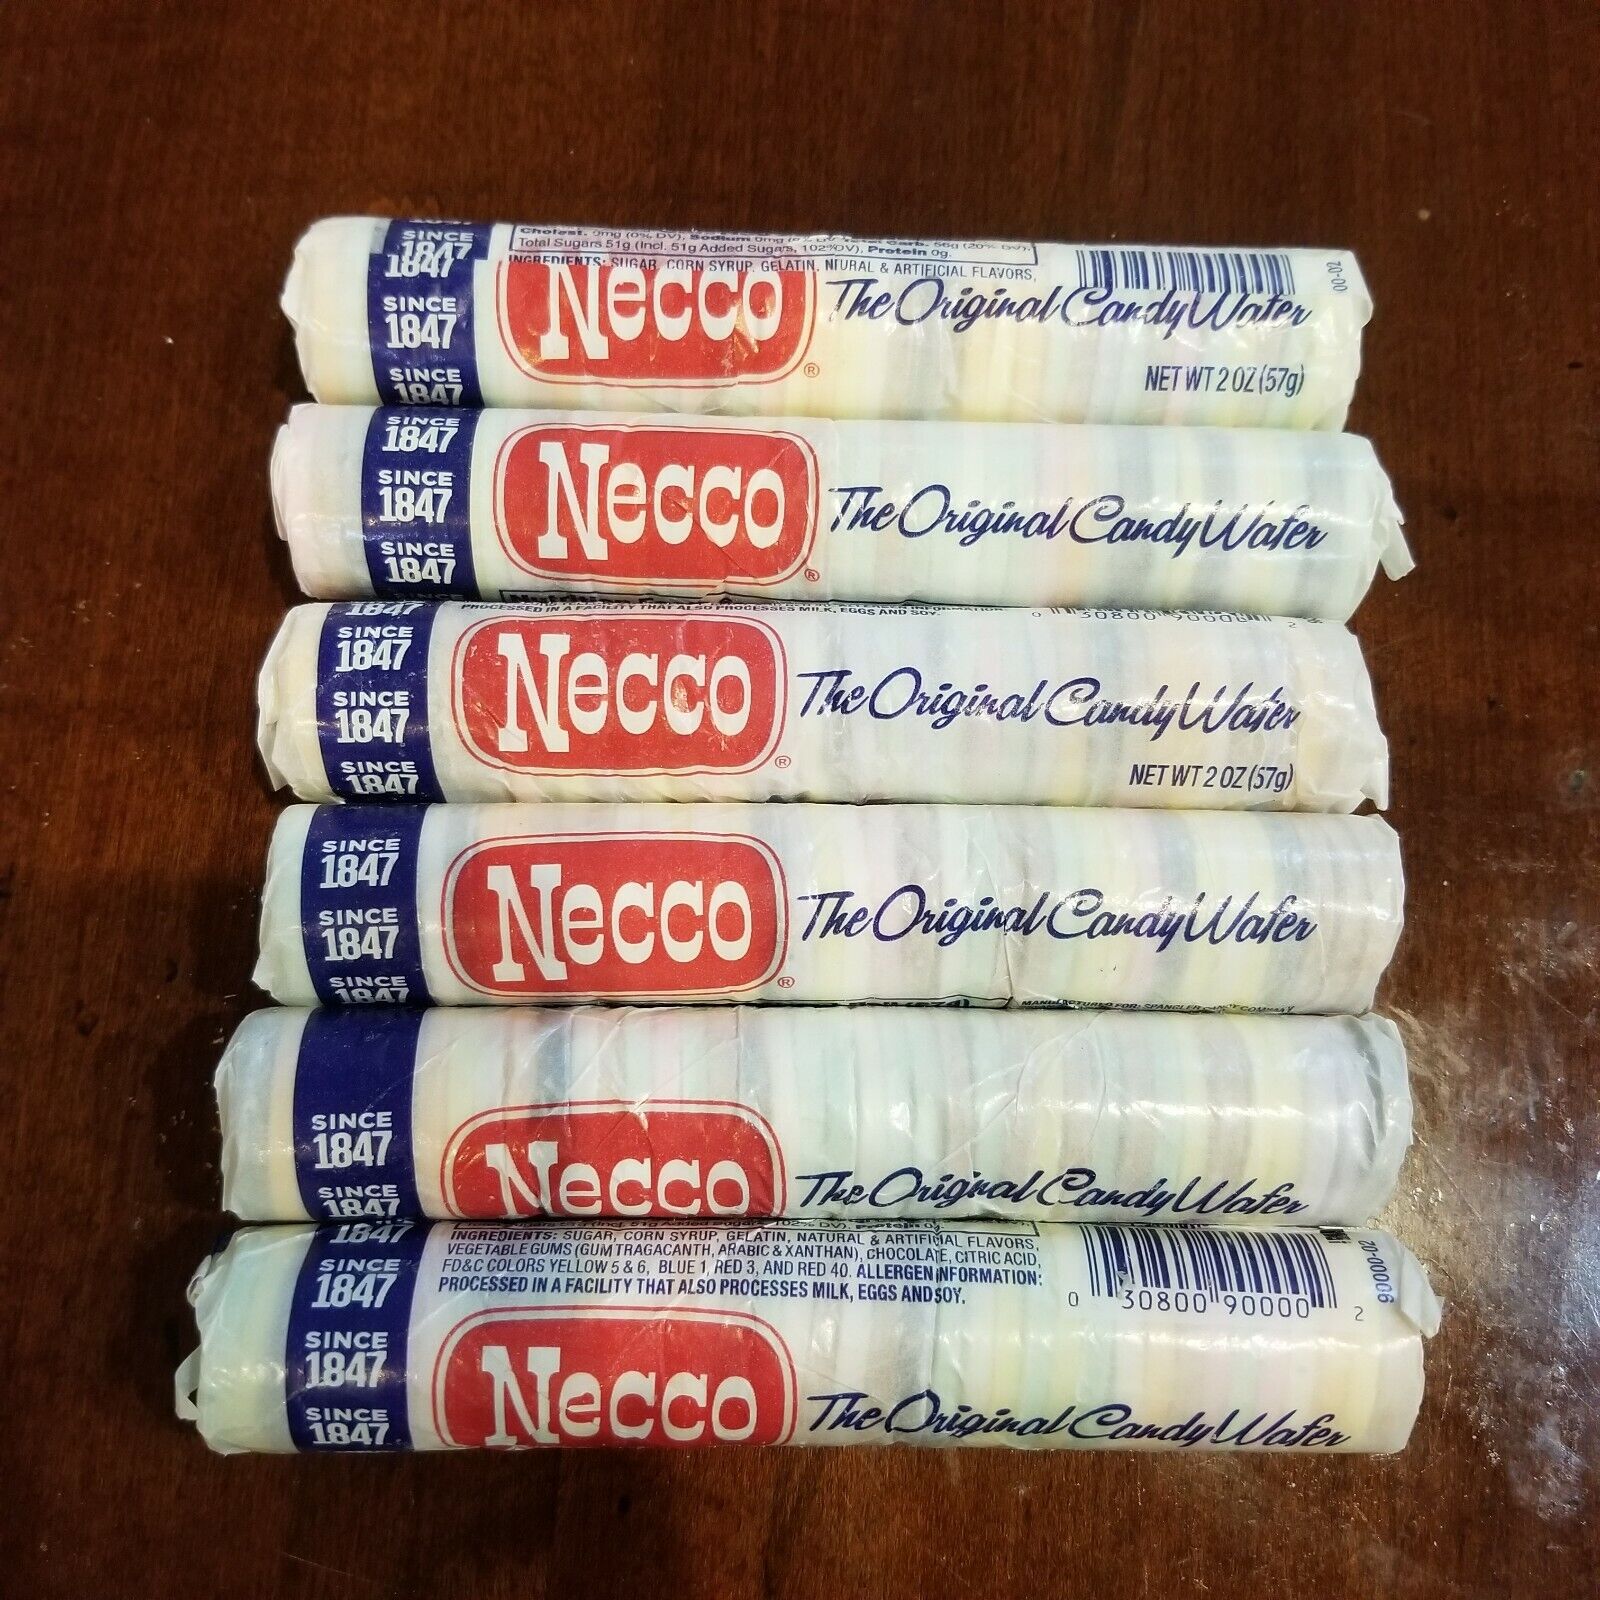 NEW Necco Wafers The Original Candy Wafer 2oz each 6 pcs exp 2/10/23